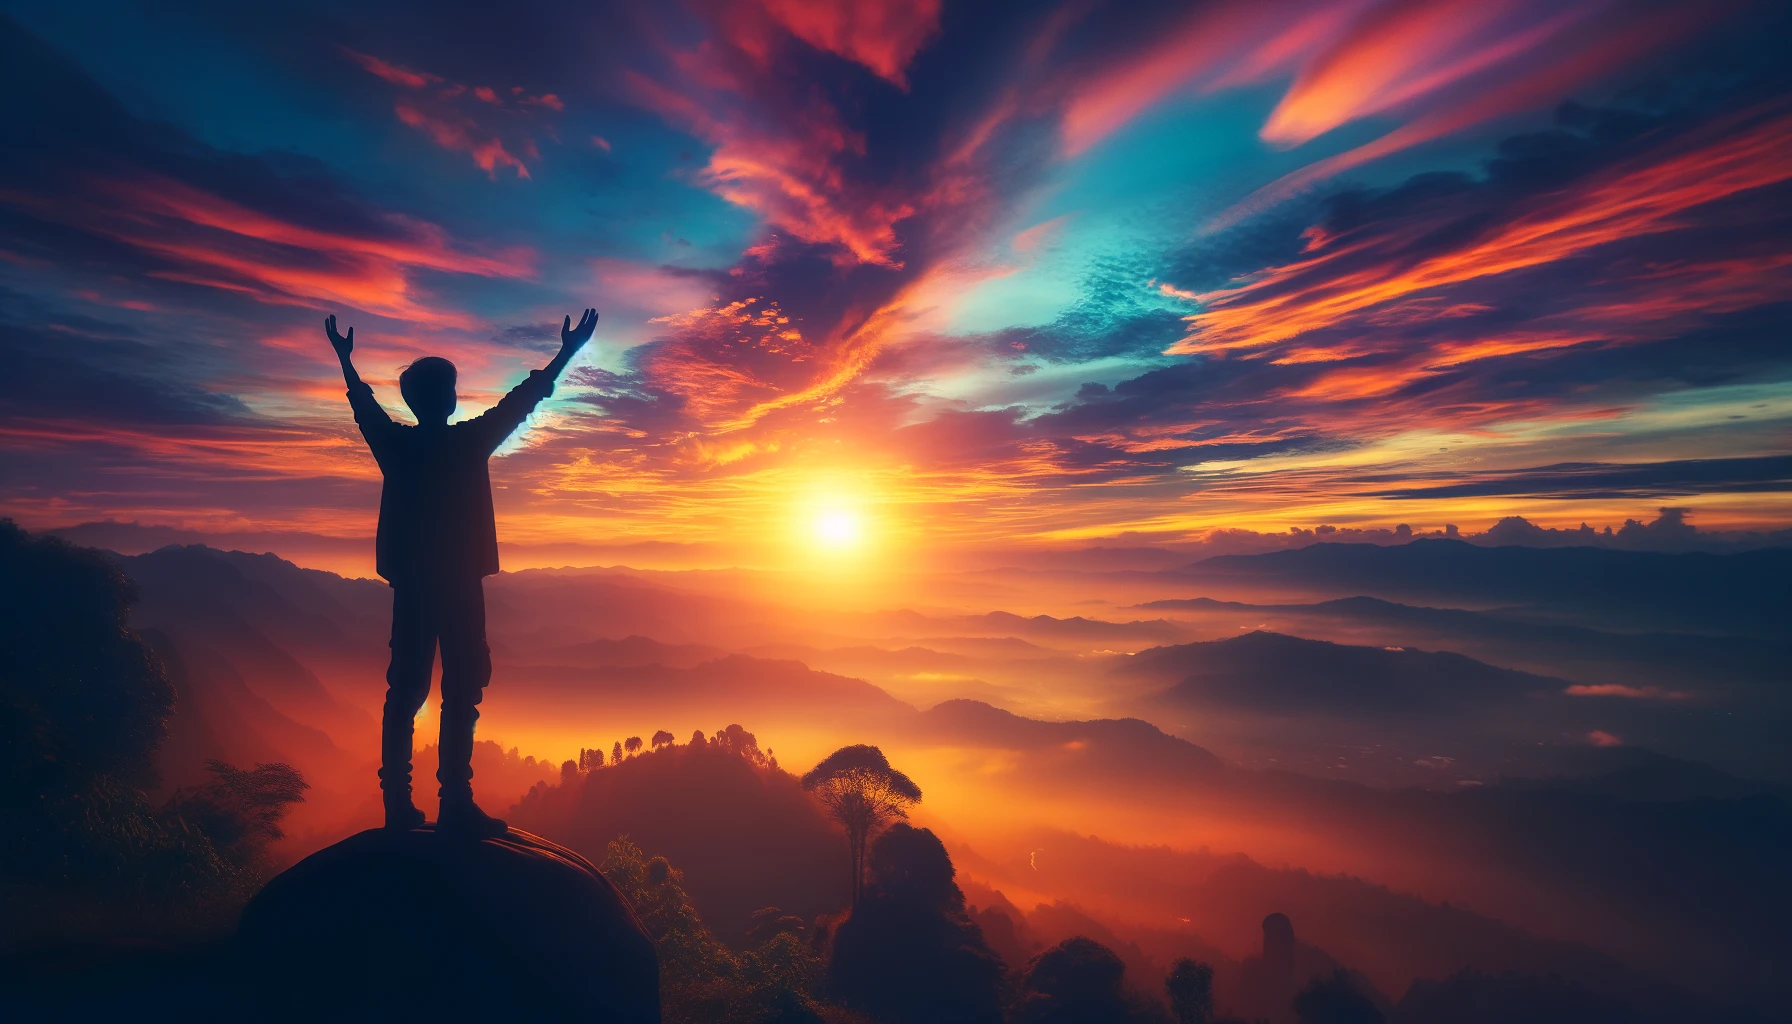 The silhouette of a person facing the sunrise with an arm raised in praise. The scene is imbued with vibrant colors of the dawn, symbolizing hope, renewal, and spiritual awakening.